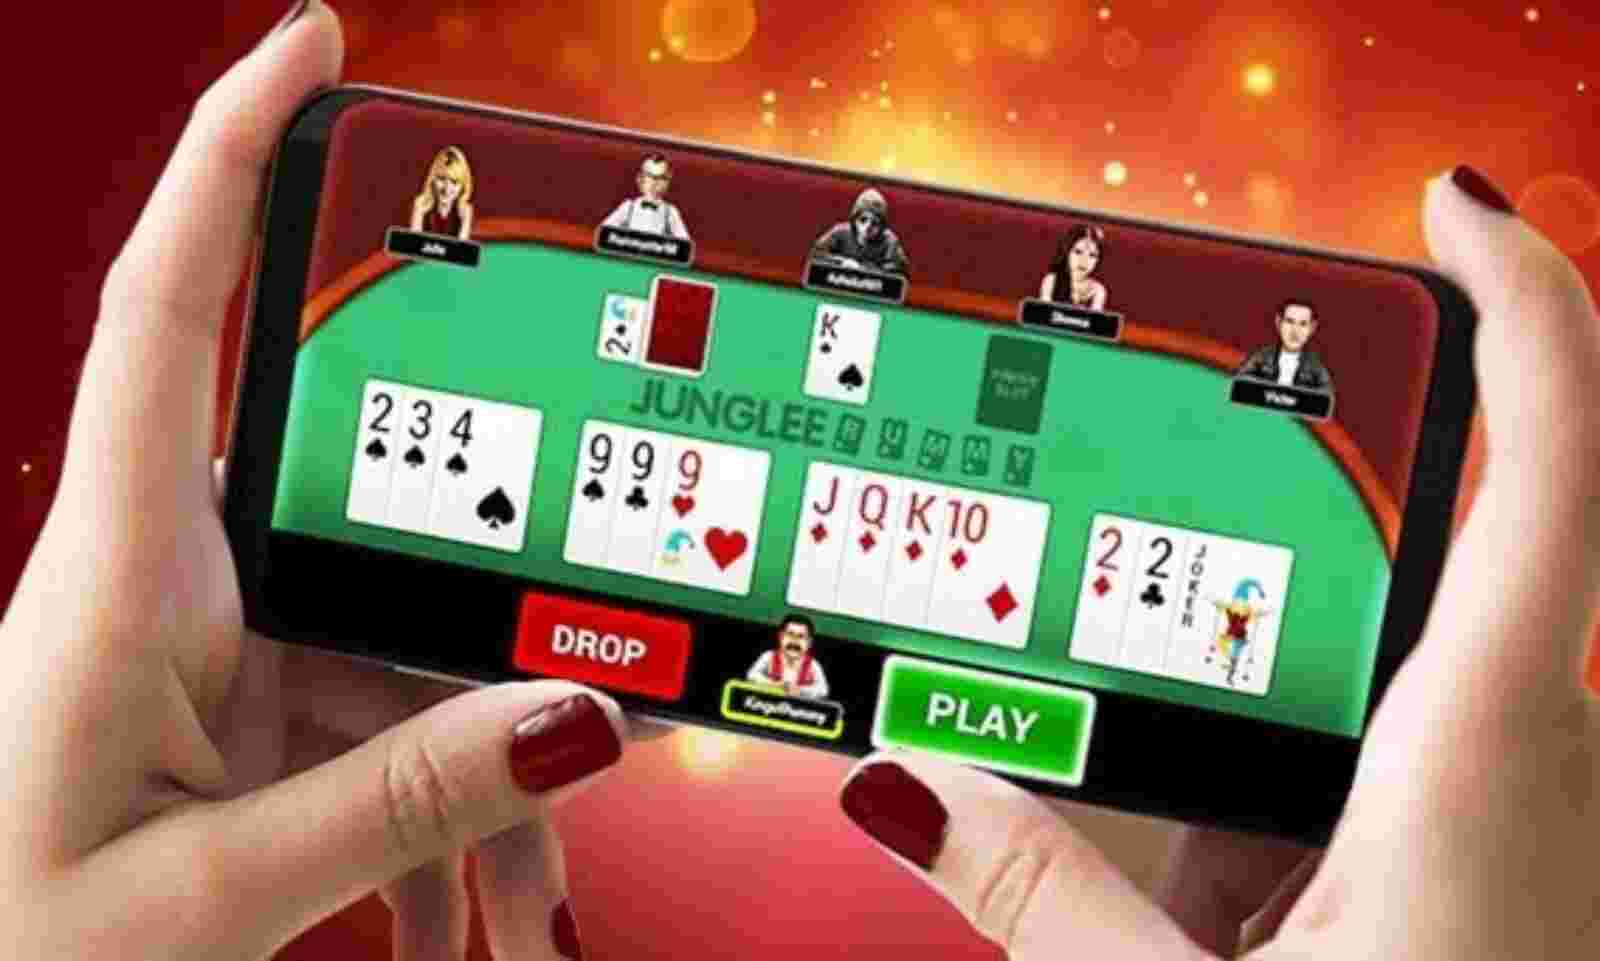 How to Play Rummy, Step by Step Guide Tutorials